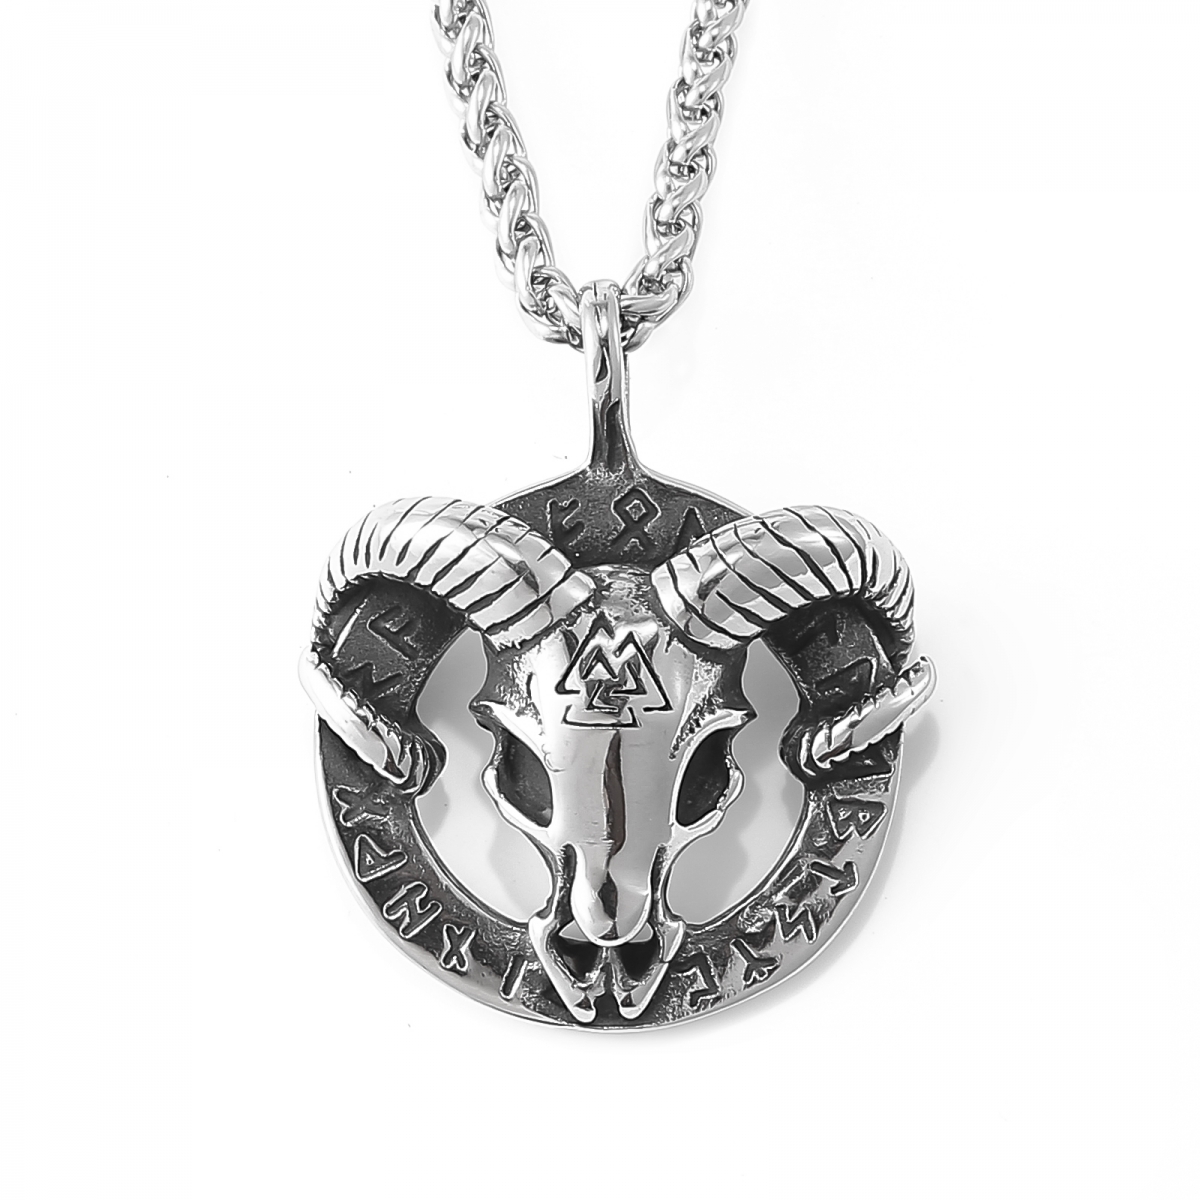 Thor Goat Necklace US$2.9/PC-NORSECOLLECTION- Viking Jewelry,Viking Necklace,Viking Bracelet,Viking Rings,Viking Mugs,Viking Accessories,Viking Crafts